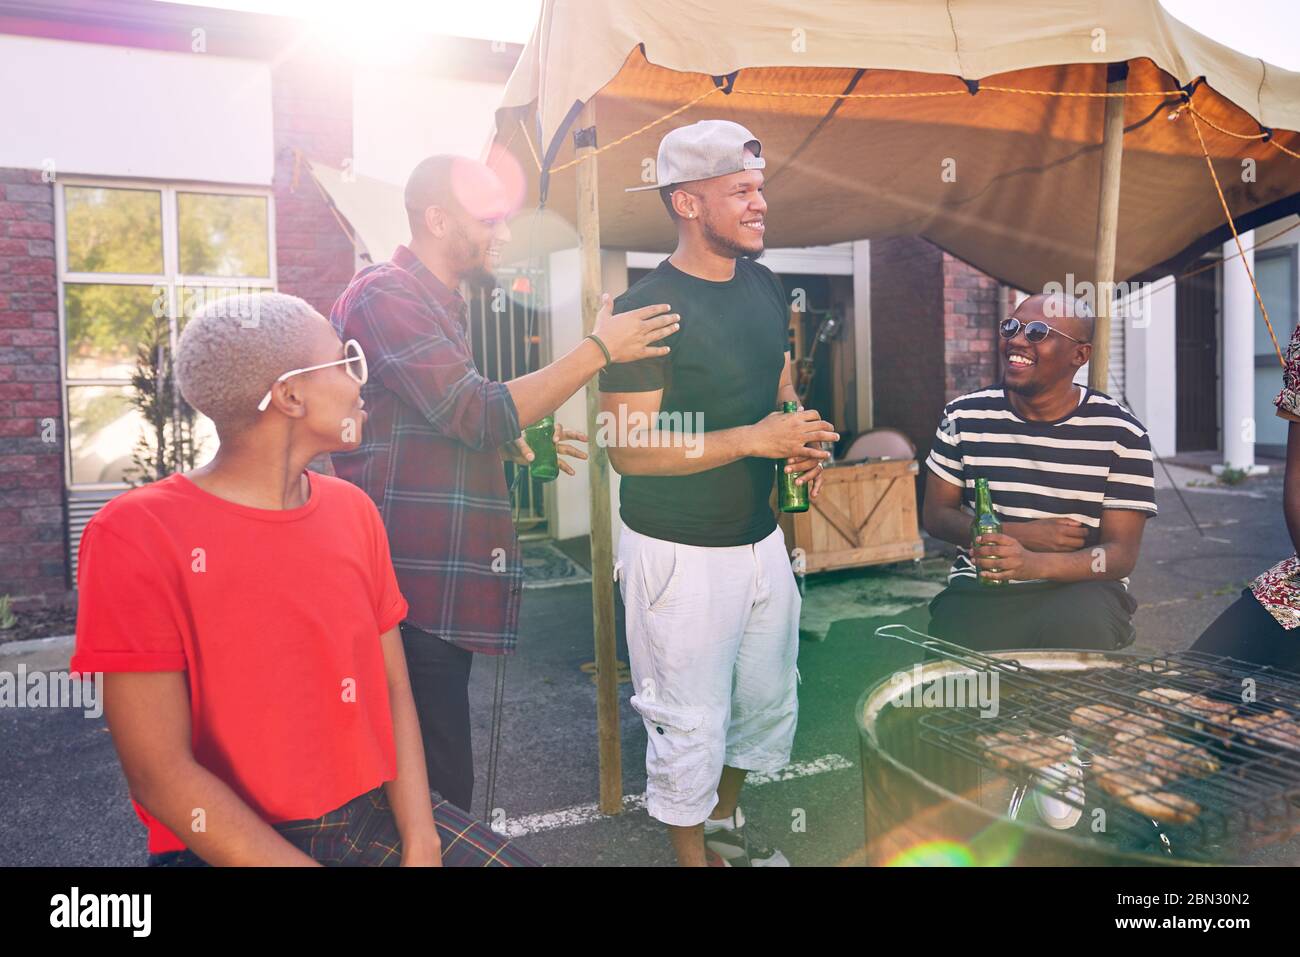 Friends hanging out and enjoying barbecue in sunny parking lot Stock Photo